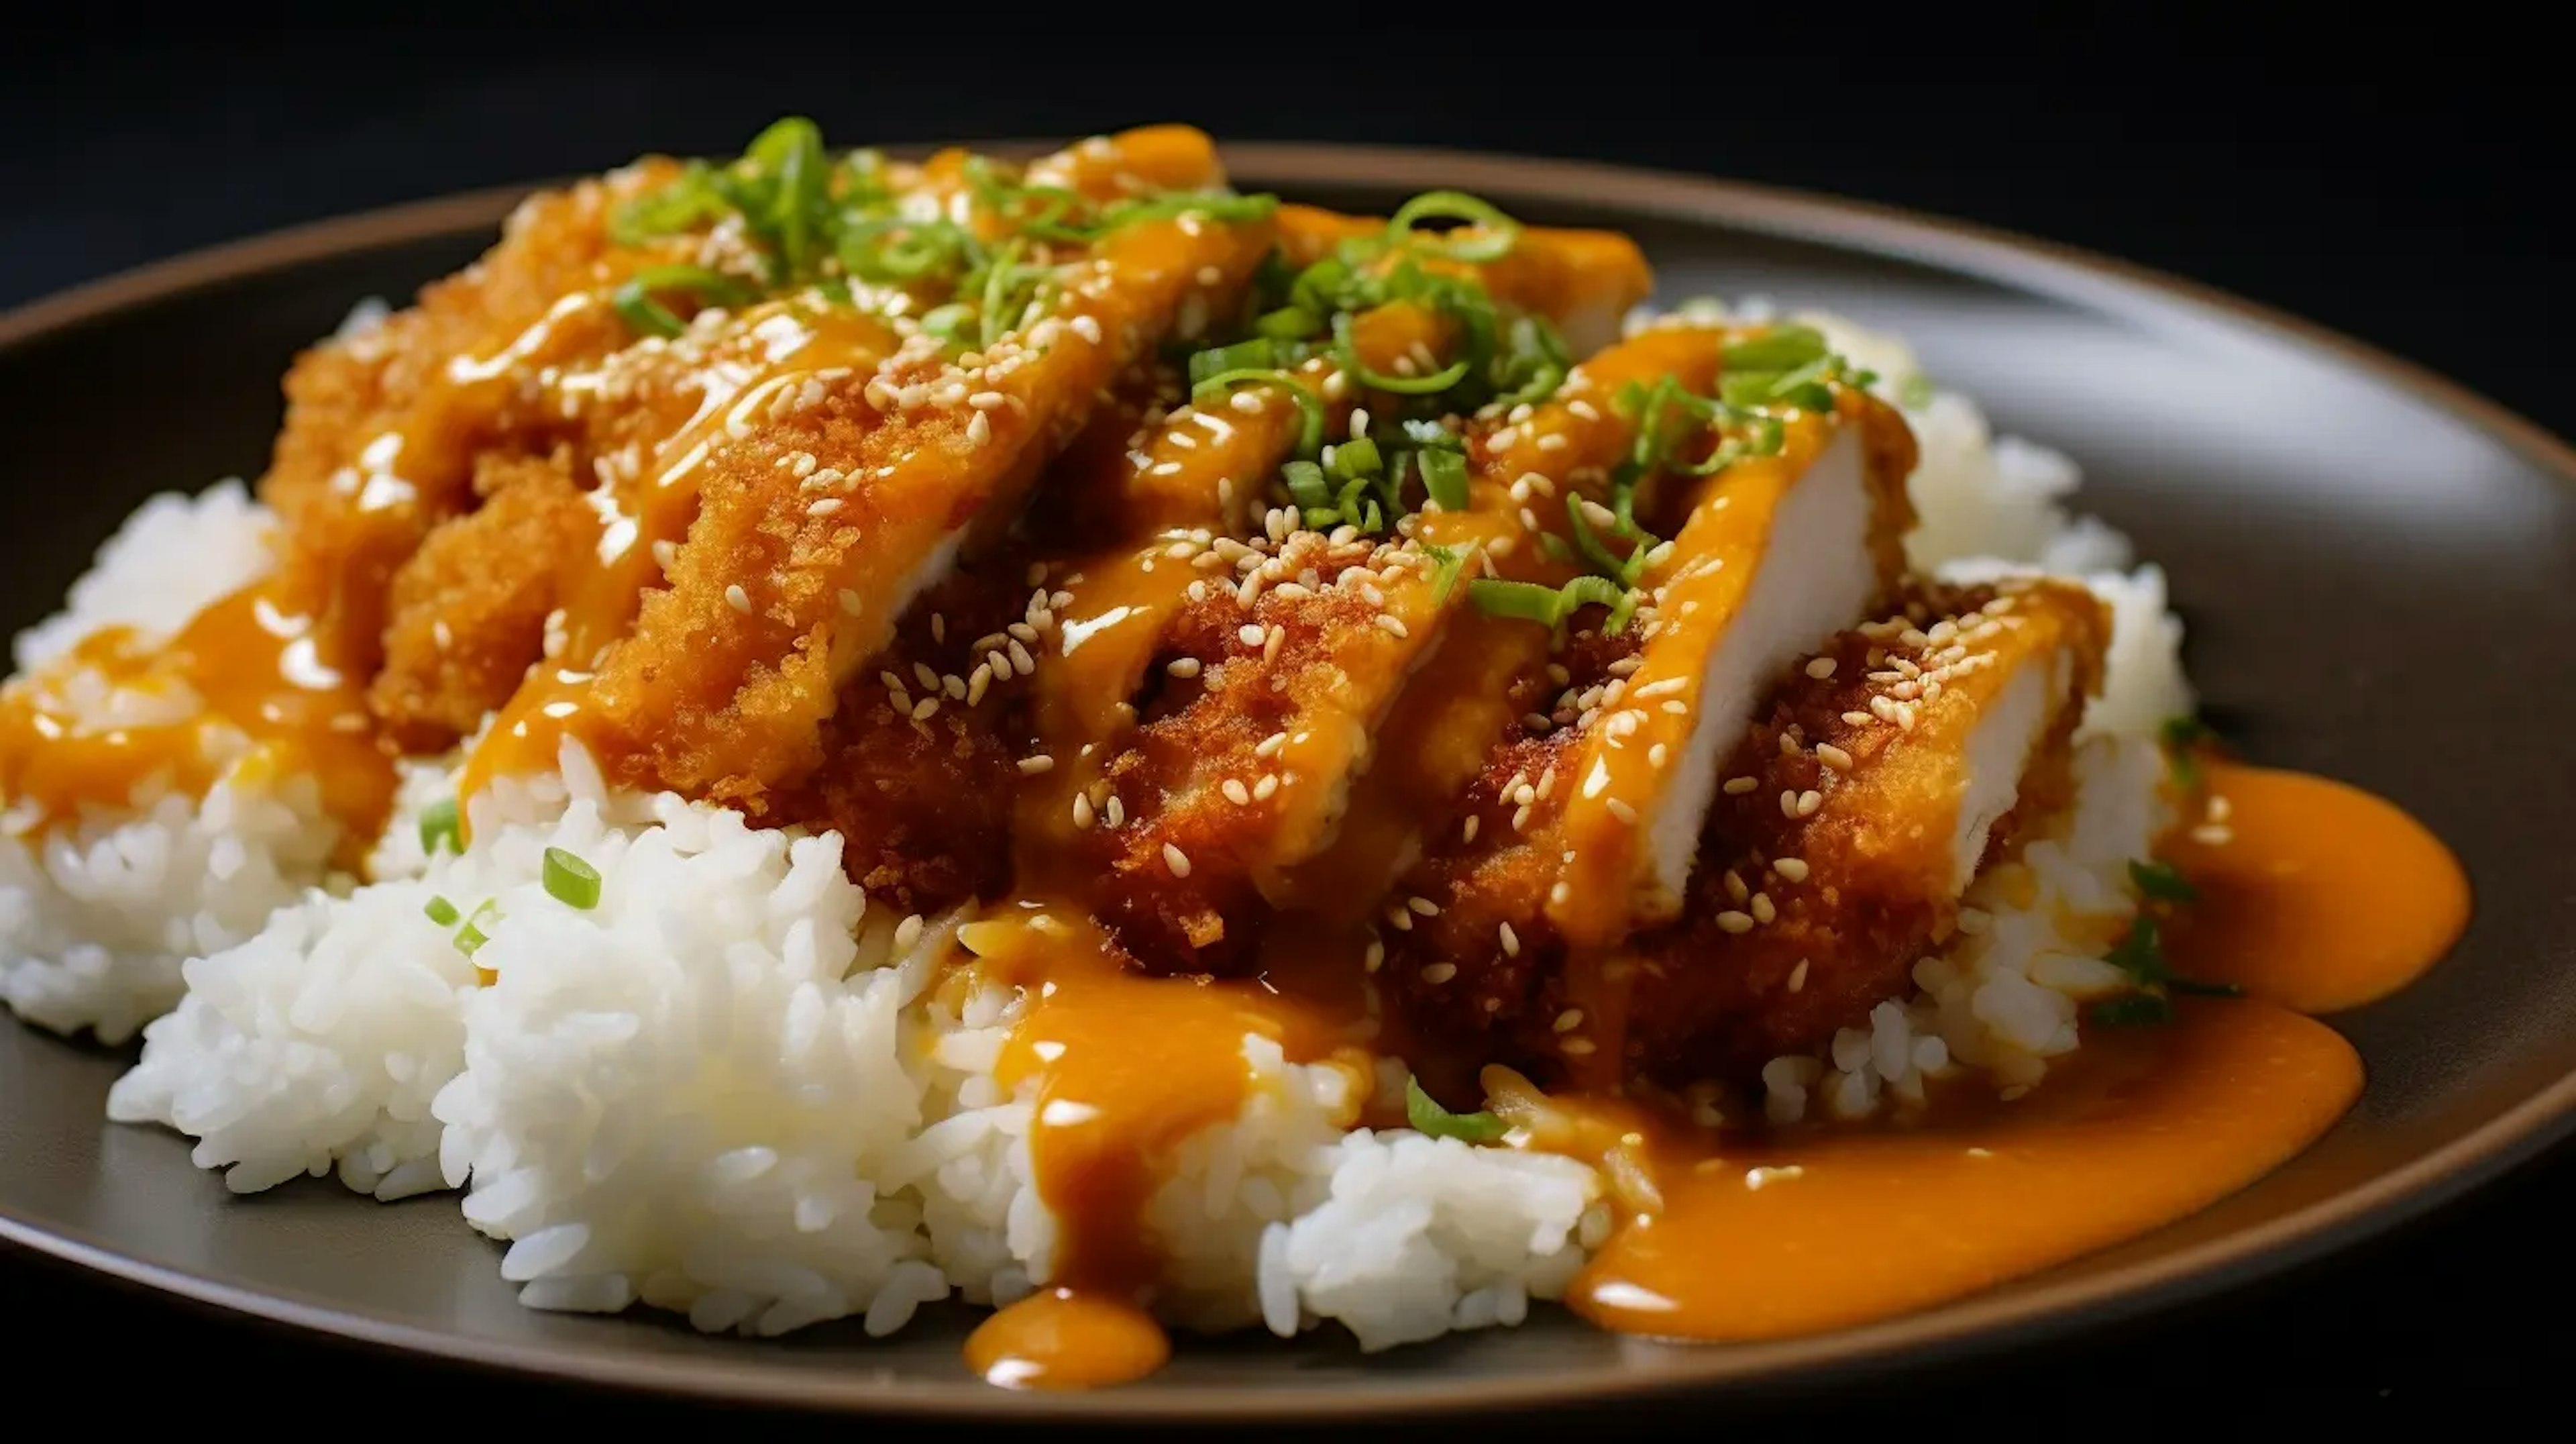 Golden-brown Katsu Curry with crispy breaded cutlet slices on steamed rice, drizzled with savory curry sauce